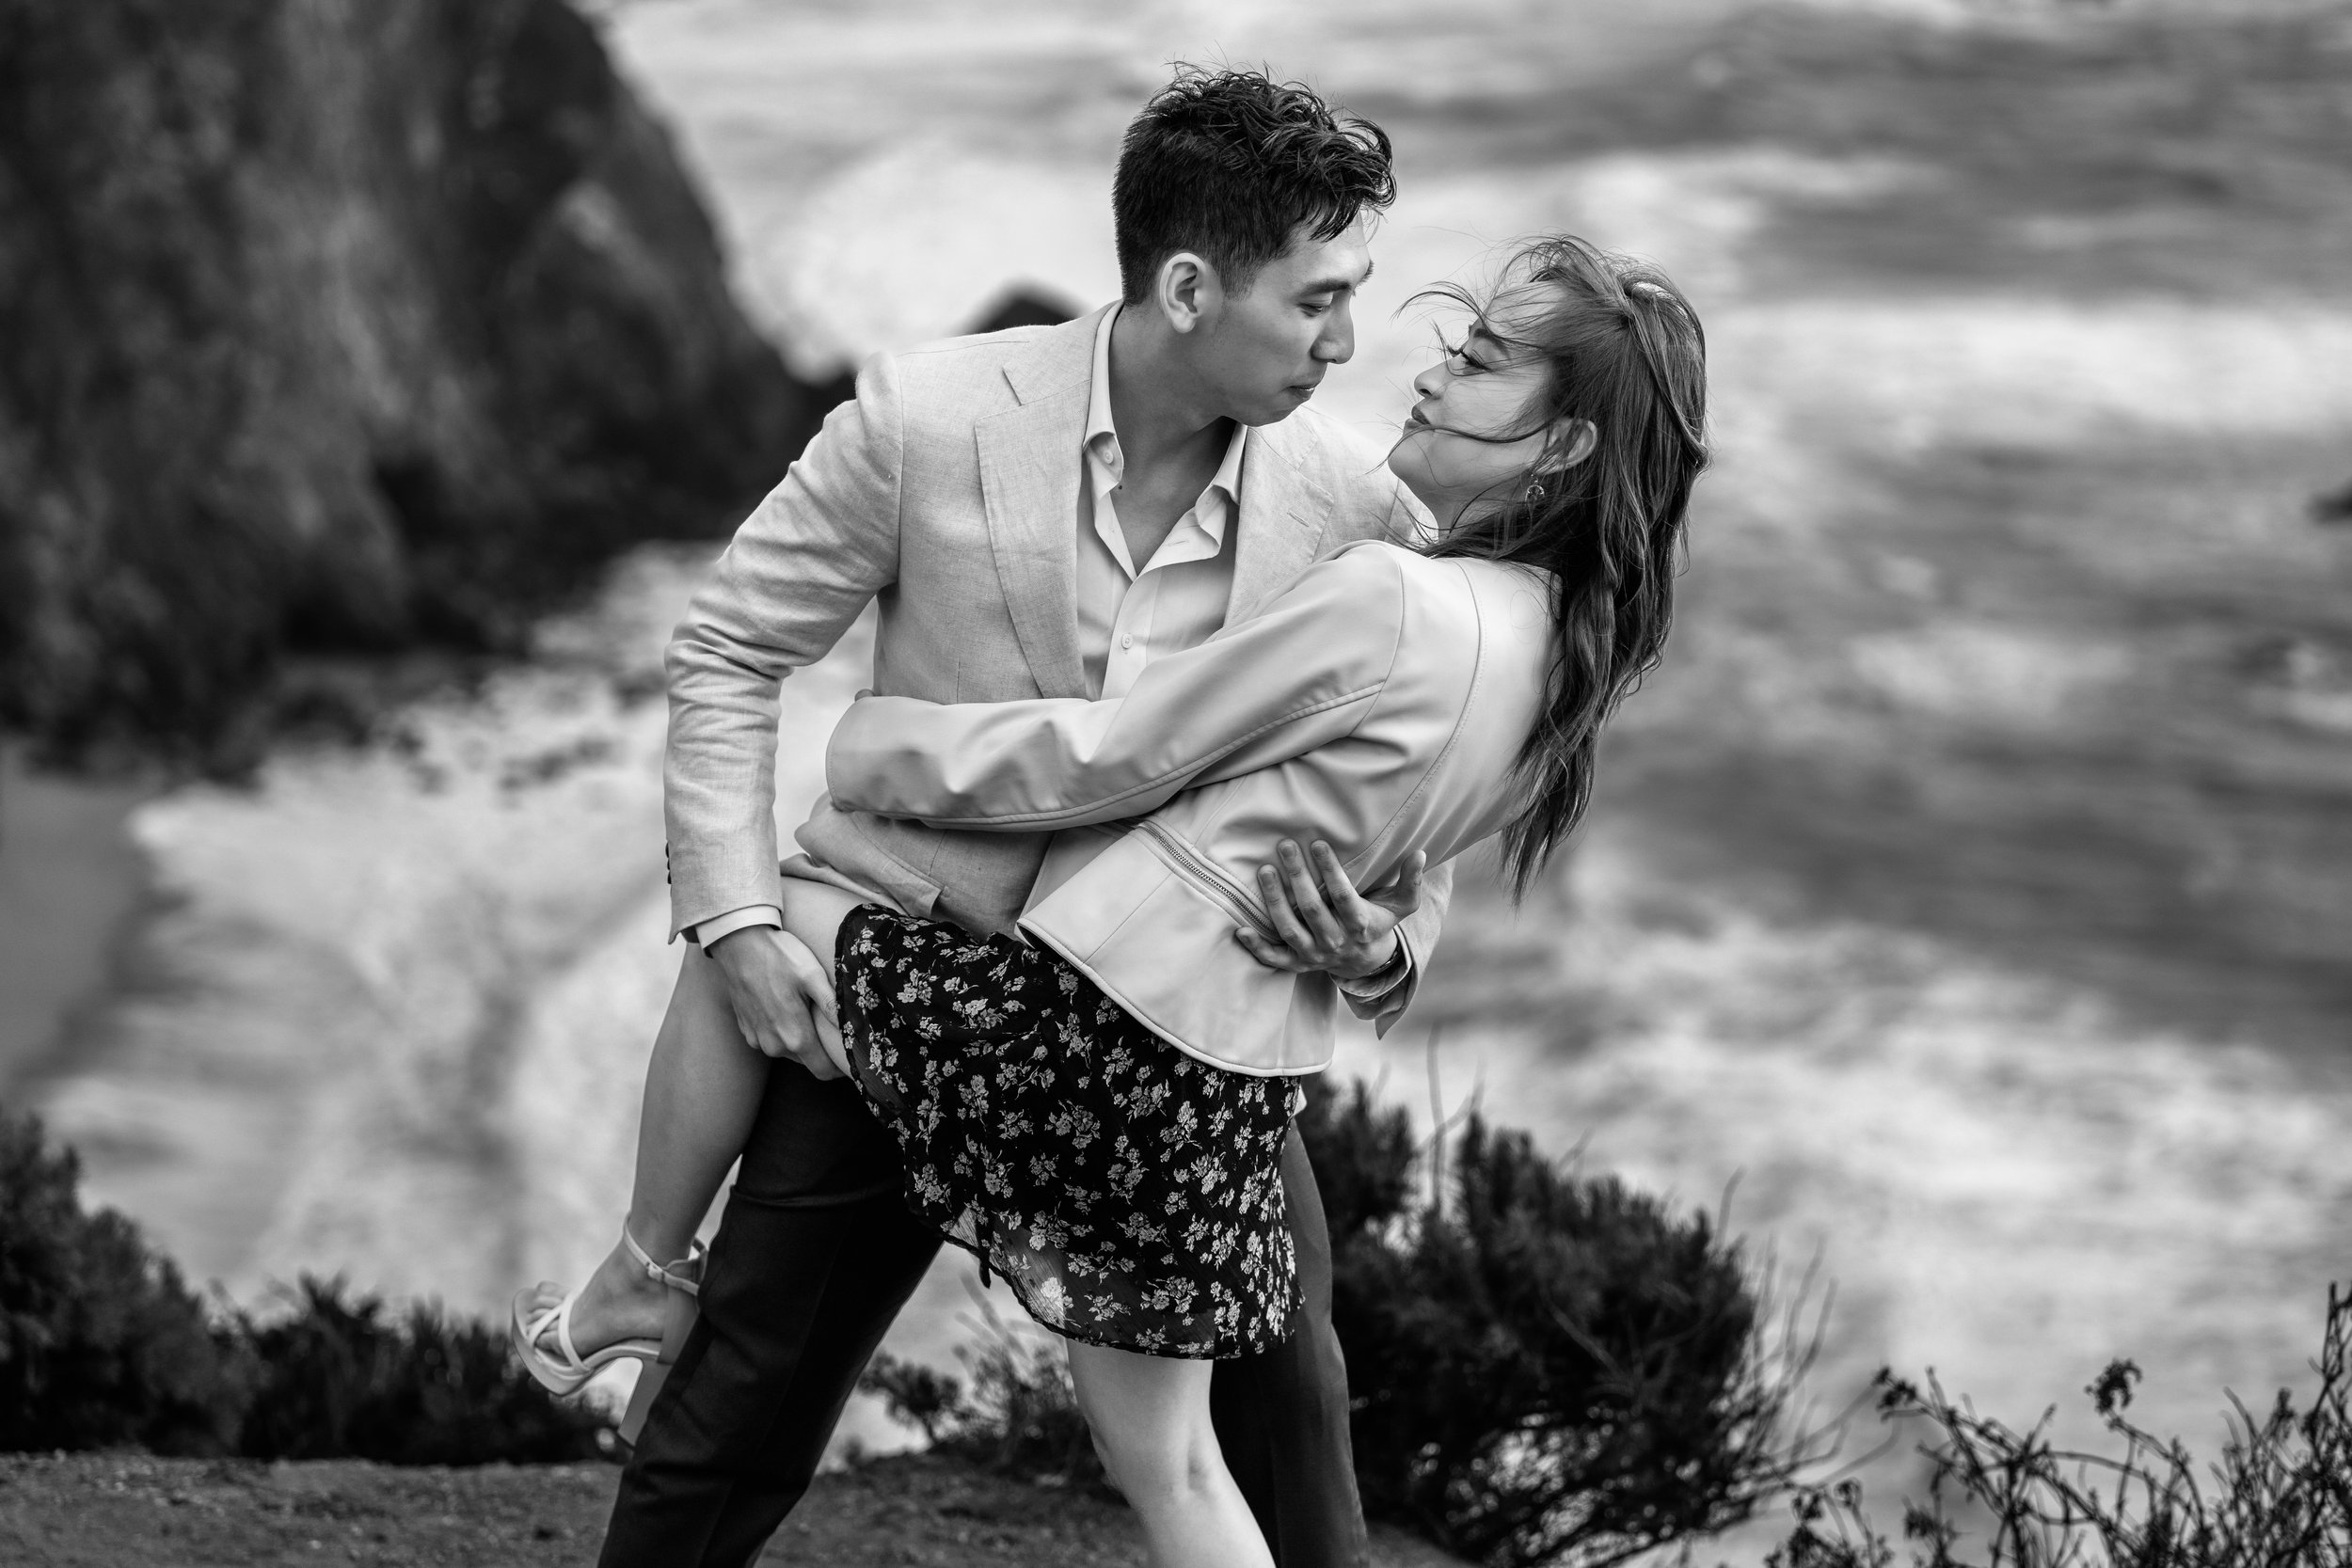 Z9A_4734_Lucy_and_Minh_Garrapata_Big_Sur_Carmel_Engagement_Photography.jpg